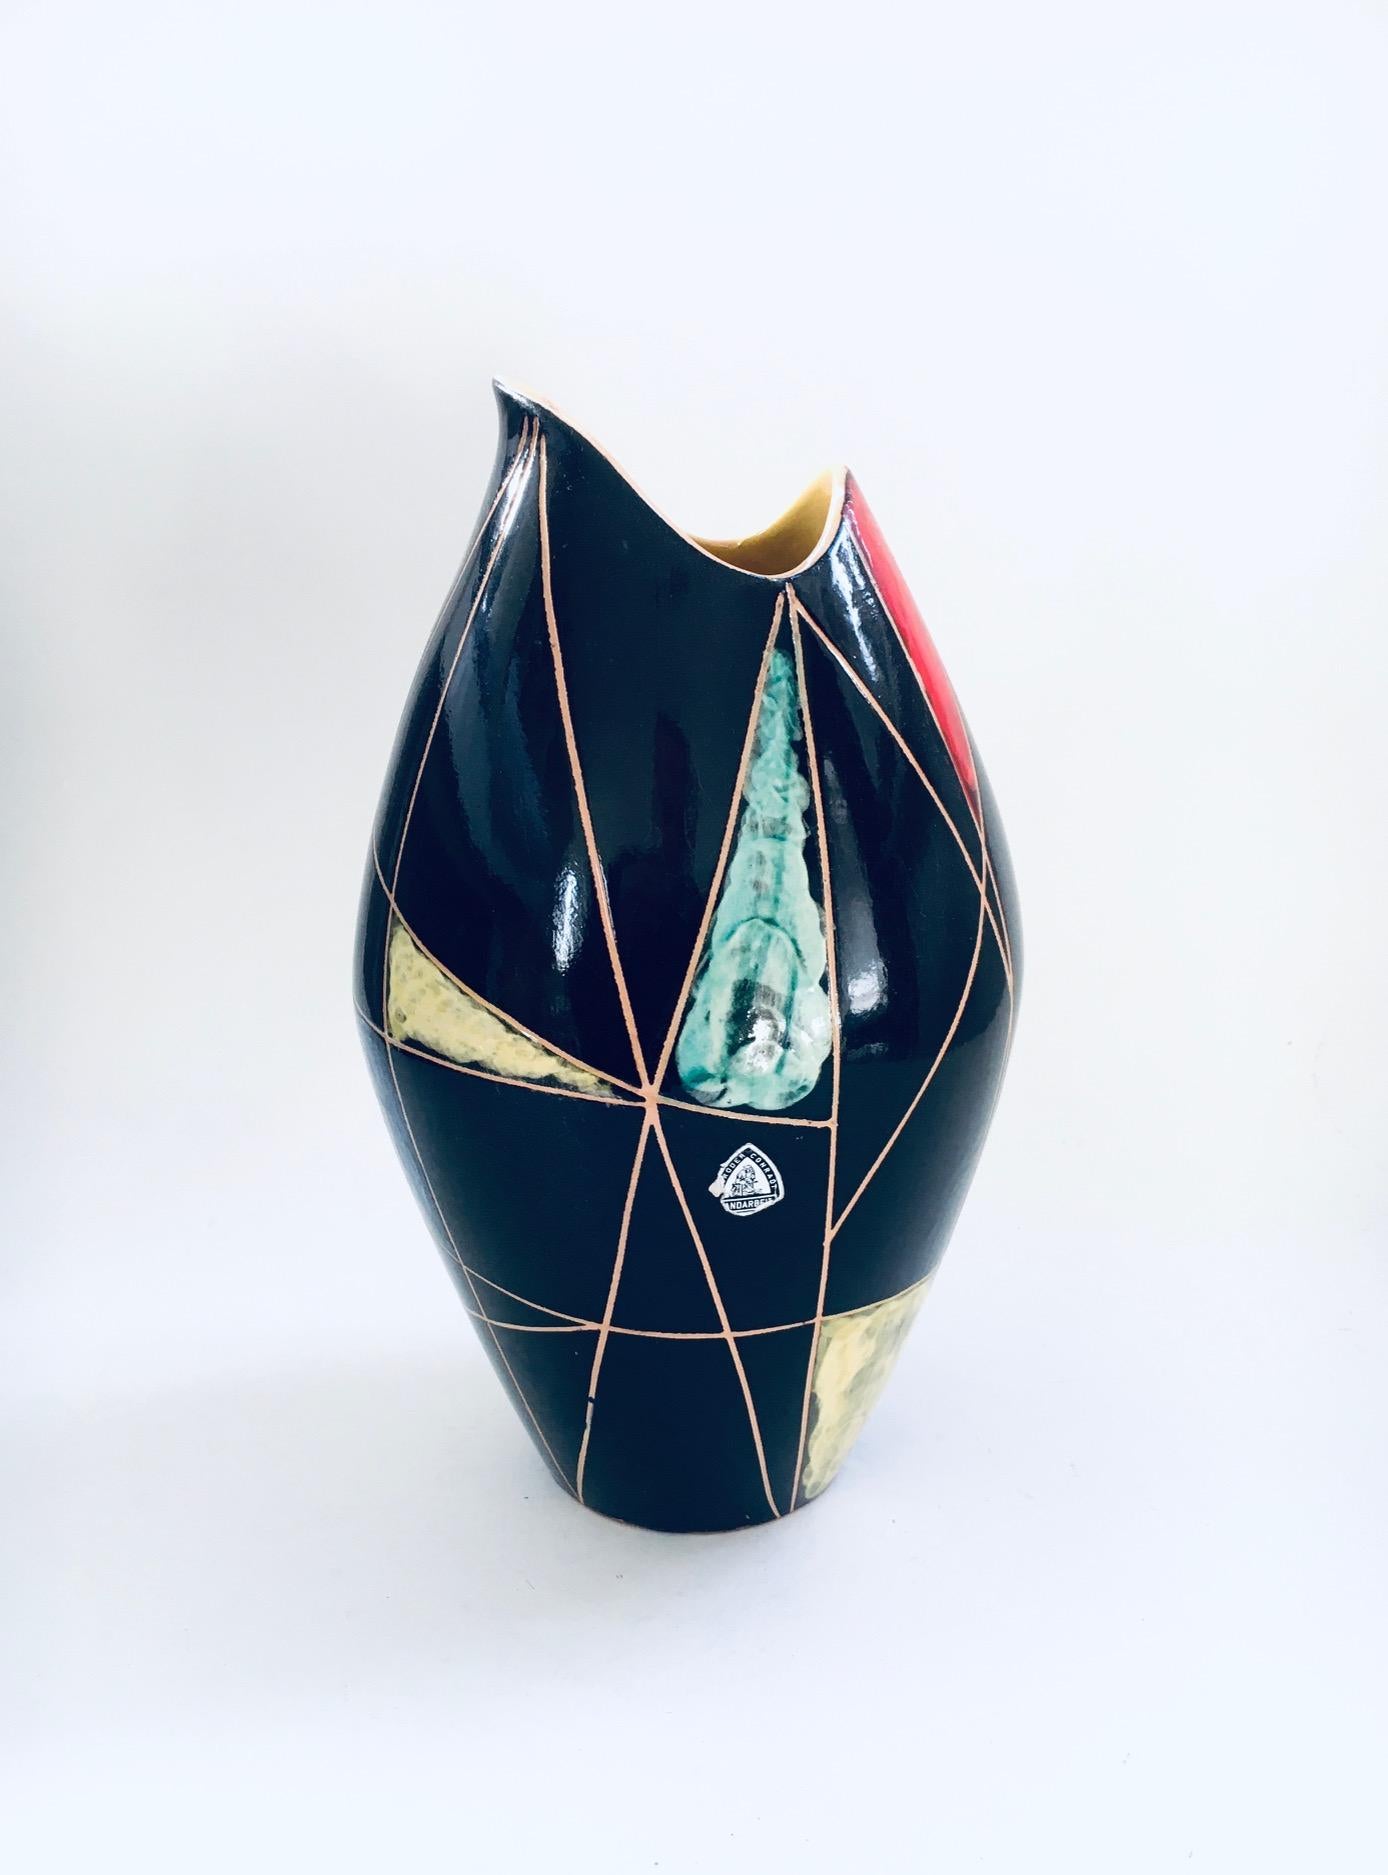 Vintage Midcentury Modern Art Ceramics KRETA 41815 model Vase. Made in West Germany by Gebruder Conradt, 1960's. Hand made Art Vase with typical Atomic Age colors and geometrical shapes. Fish mouth model vase. Comes in very good, all original